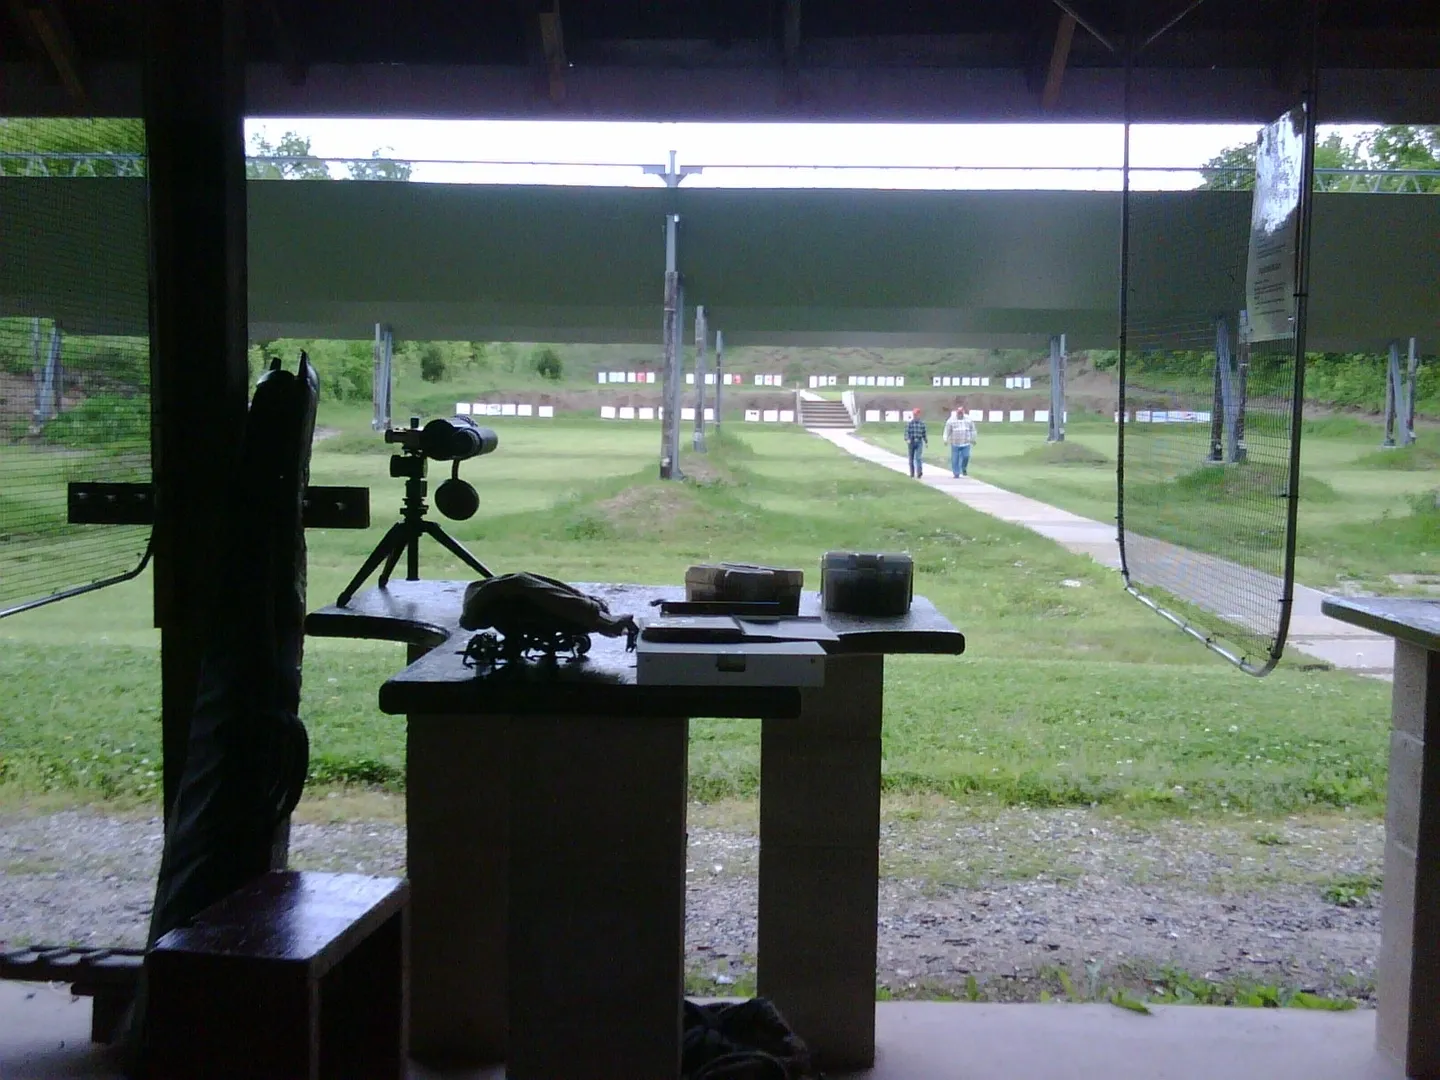 A table with a camera and tripod in front of a gun range.